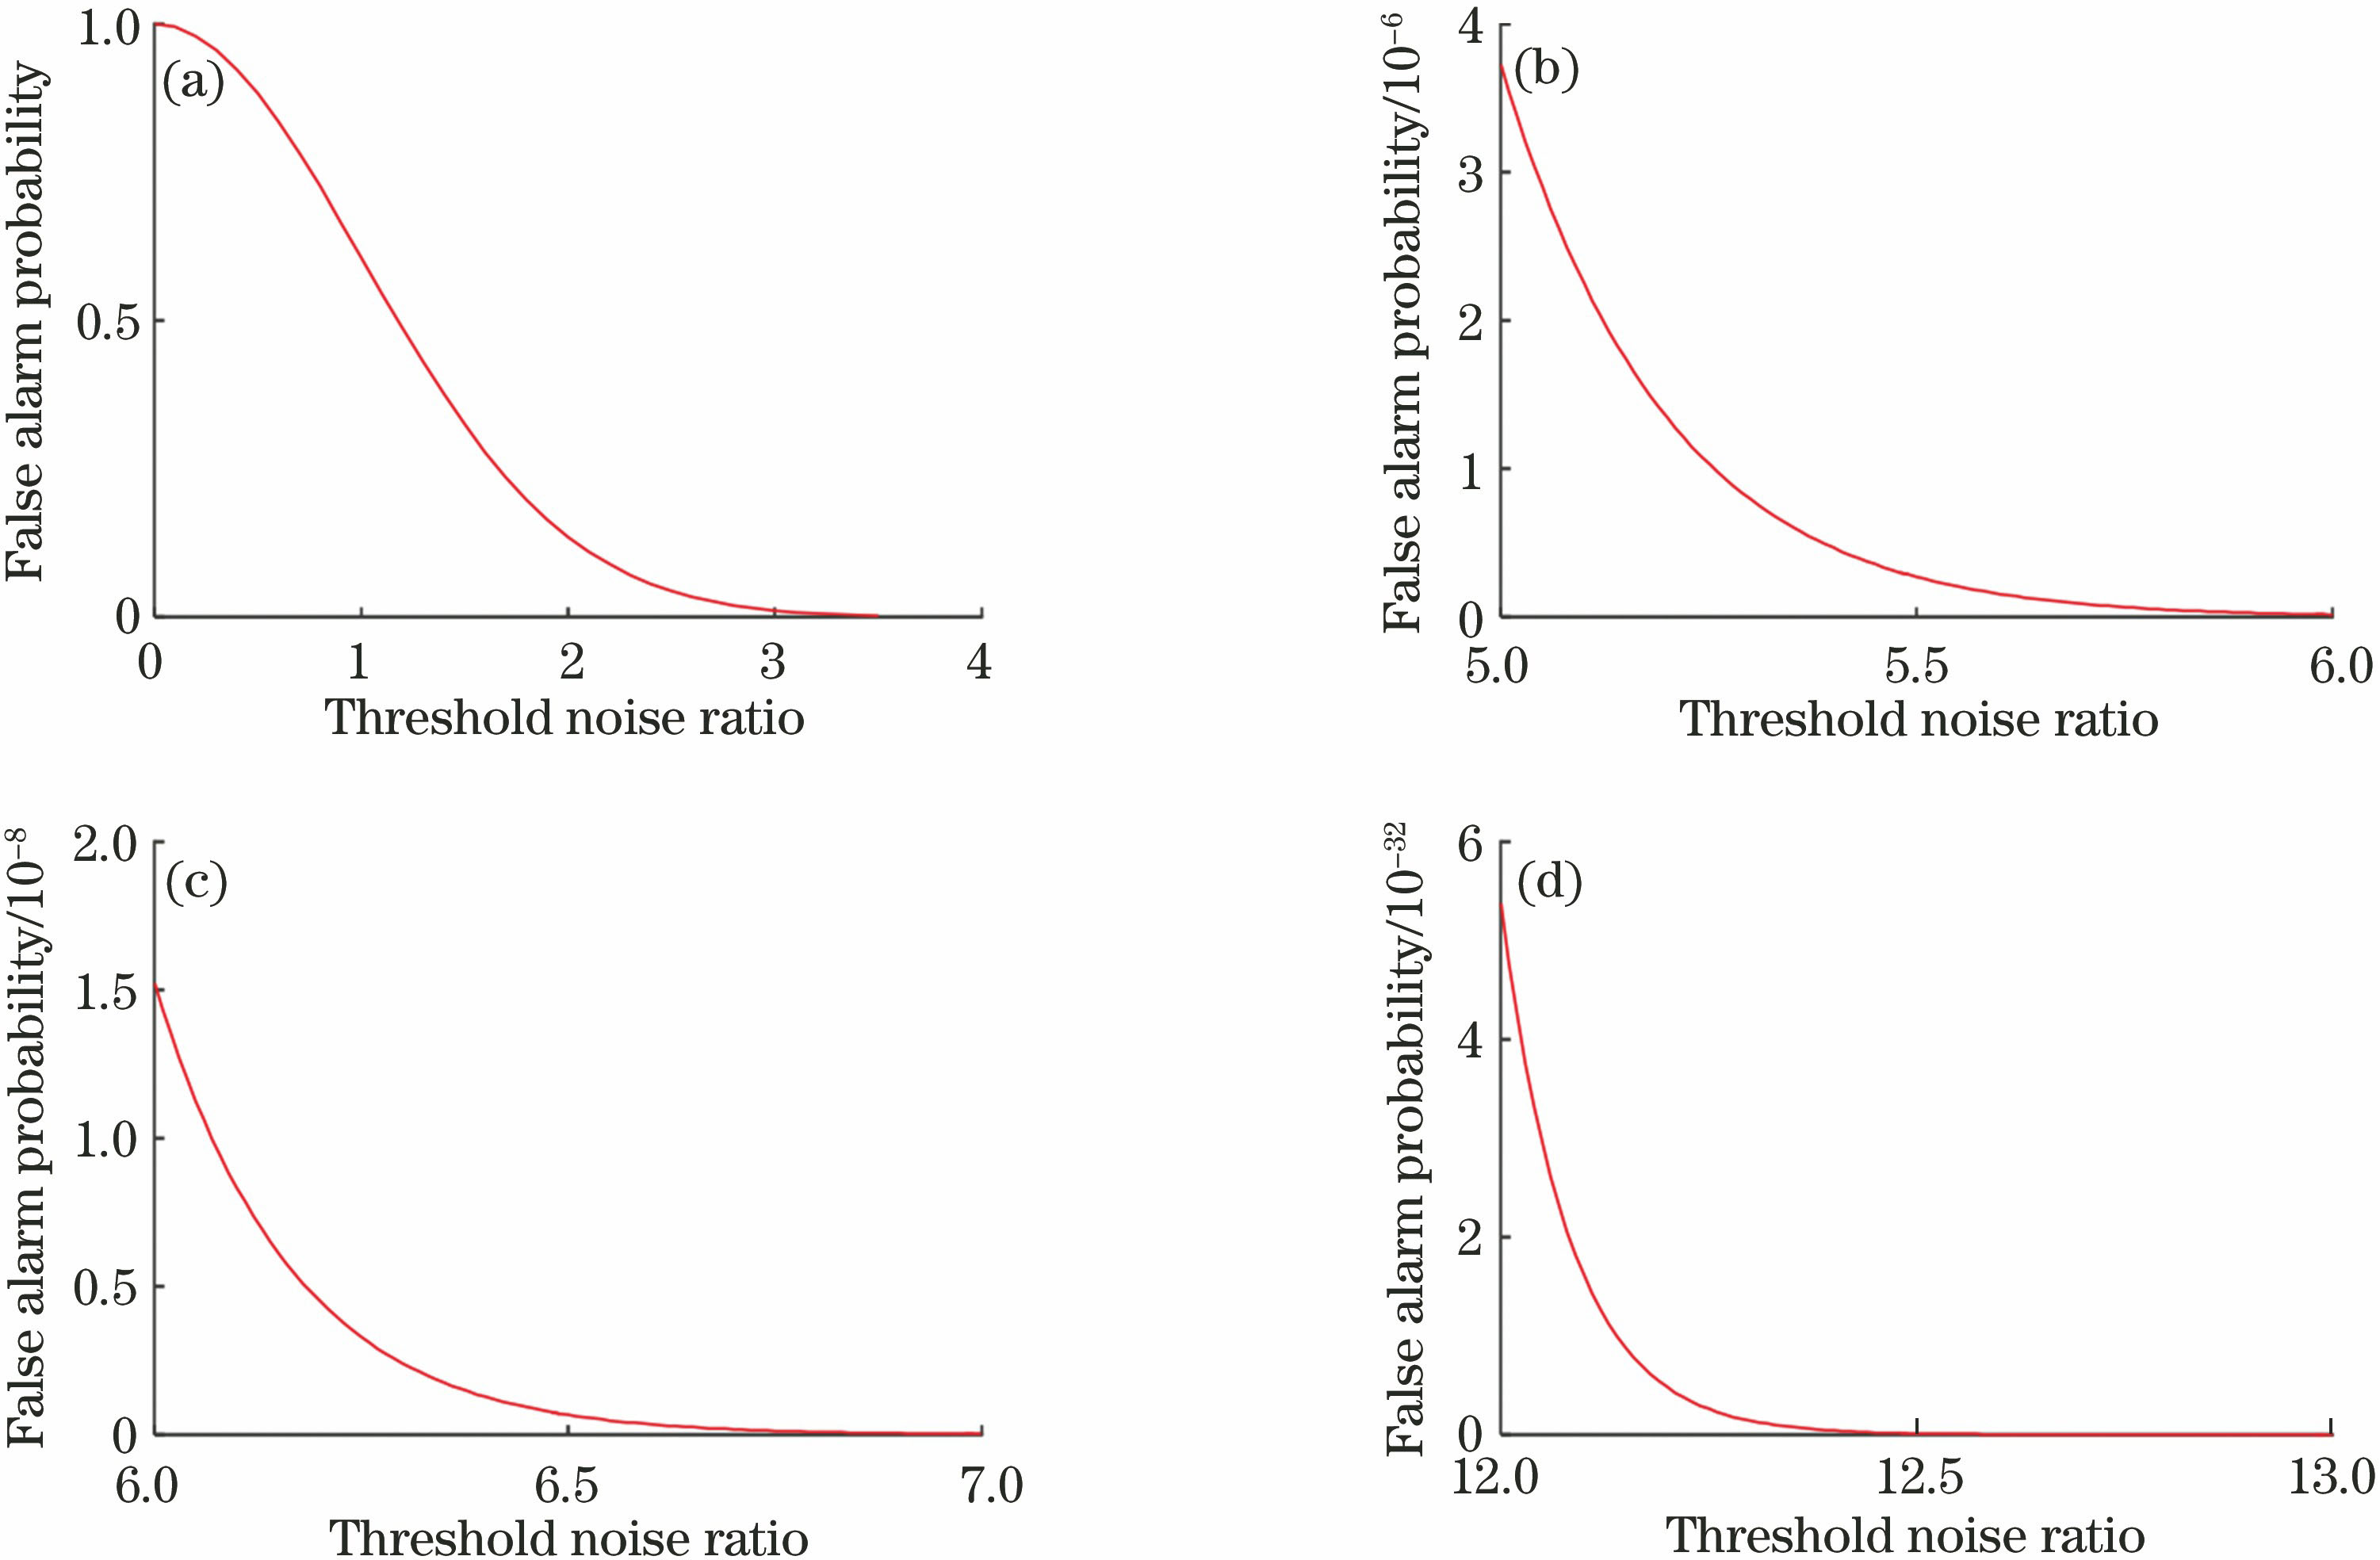 Distribution of false alarm probability with different threshold noise ratio. (a) 0-4; (b) 5-6; (7) 6-7; (d) 12-13